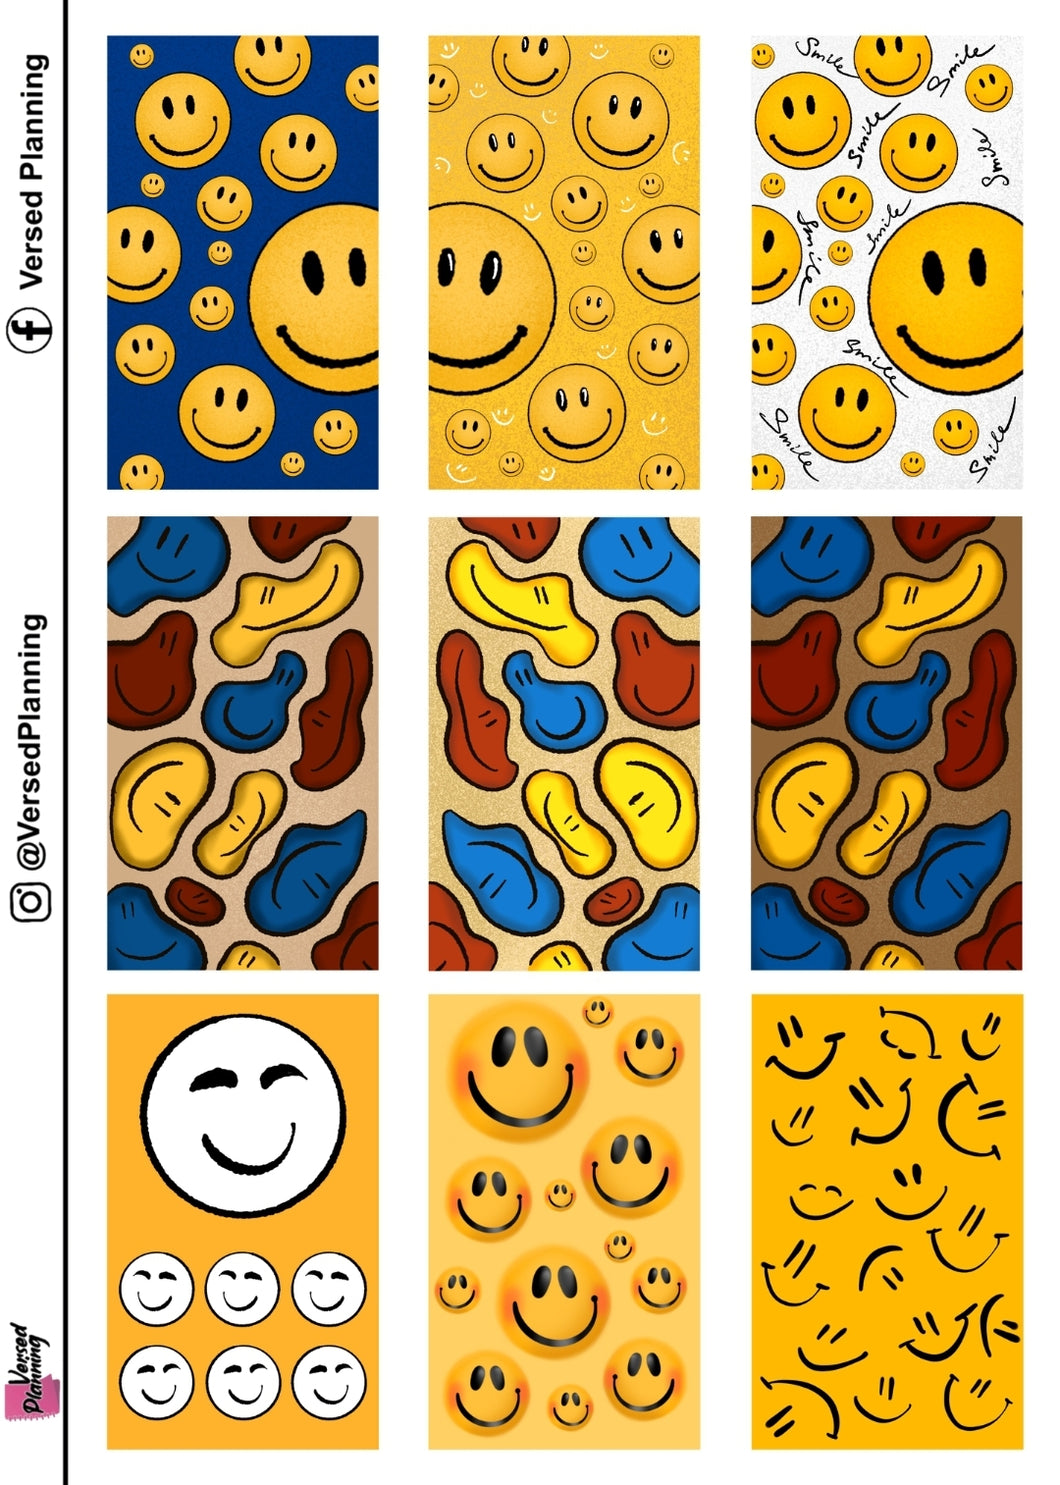 Smiley Face Elements (HP SIZE BOXES)